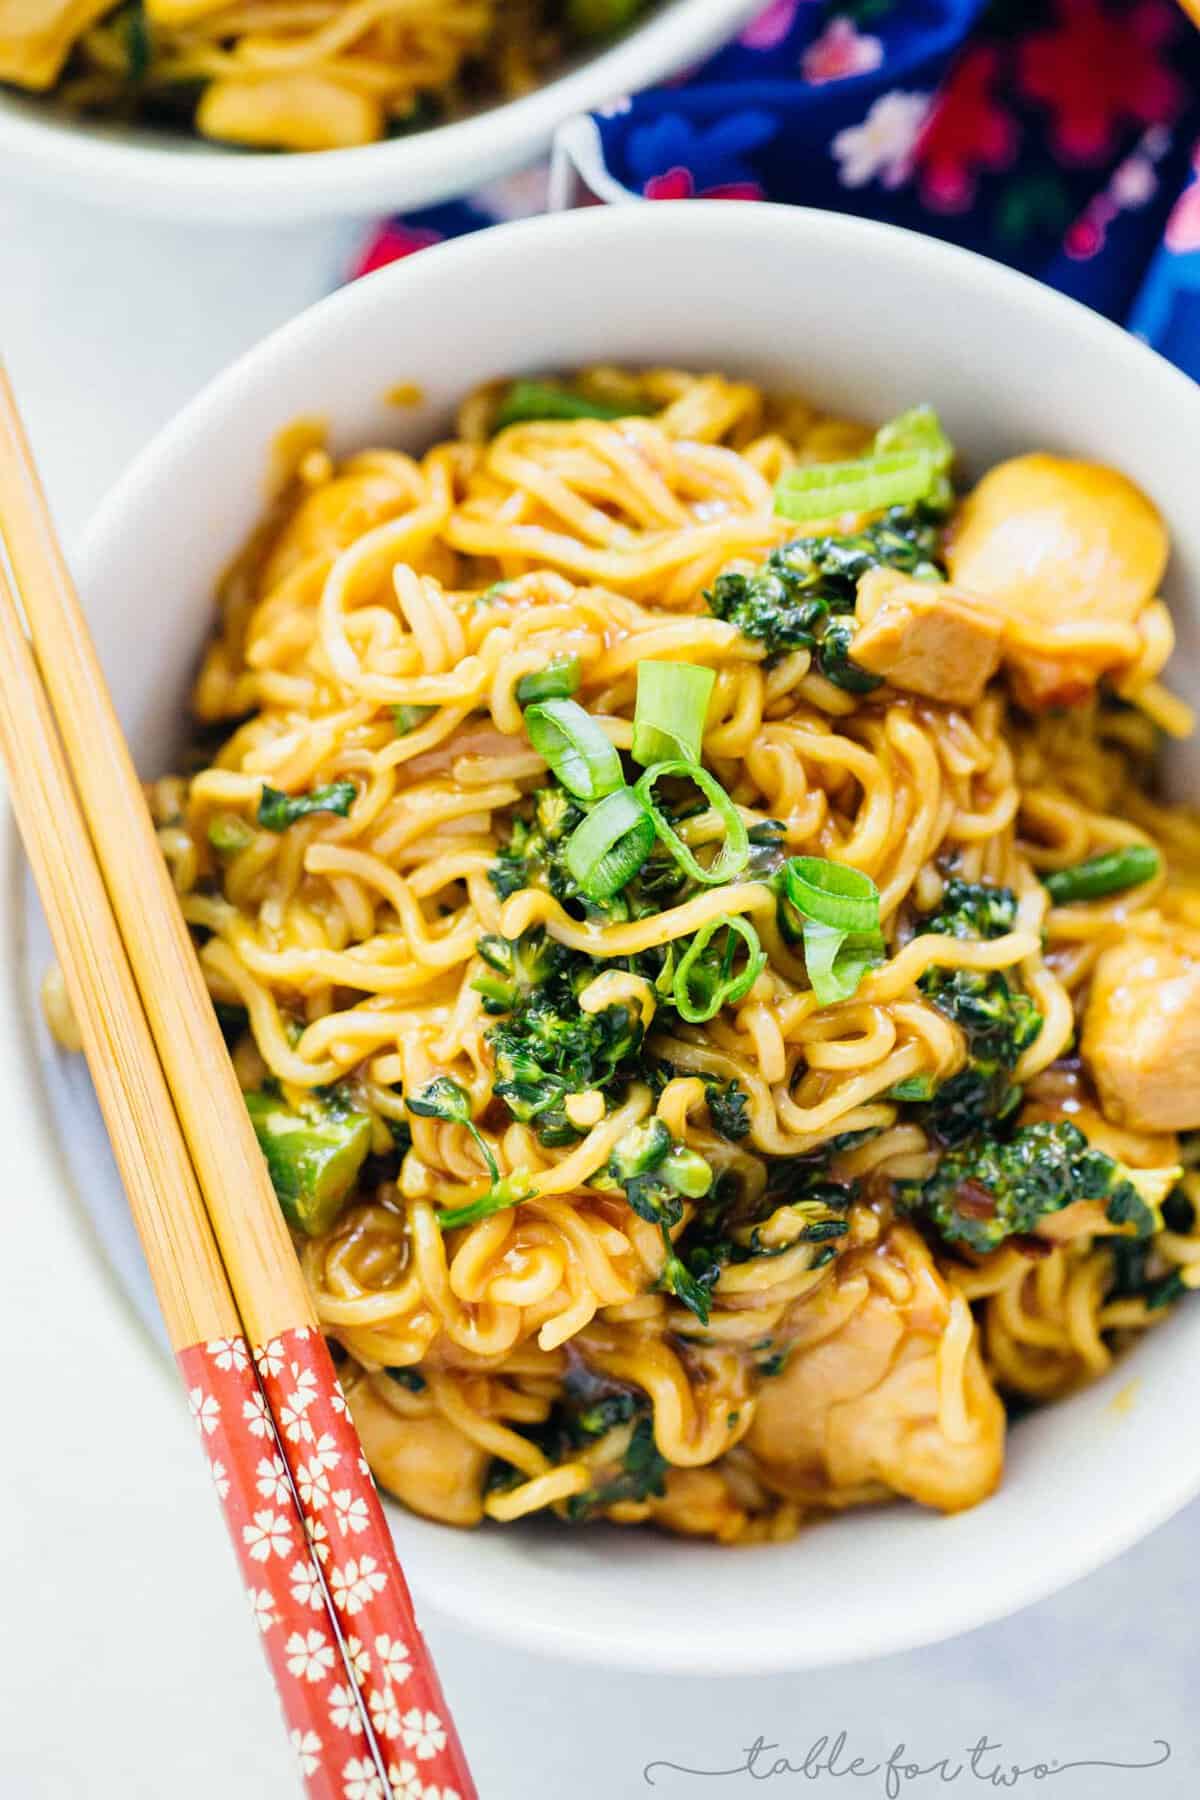 You don't have to go very far to get this classic Chinese take-out dish combined with ramen! So easy to make at home that you won't need to pick up the phone! General Tso's chicken ramen is the best combination of fast, quick dinners!